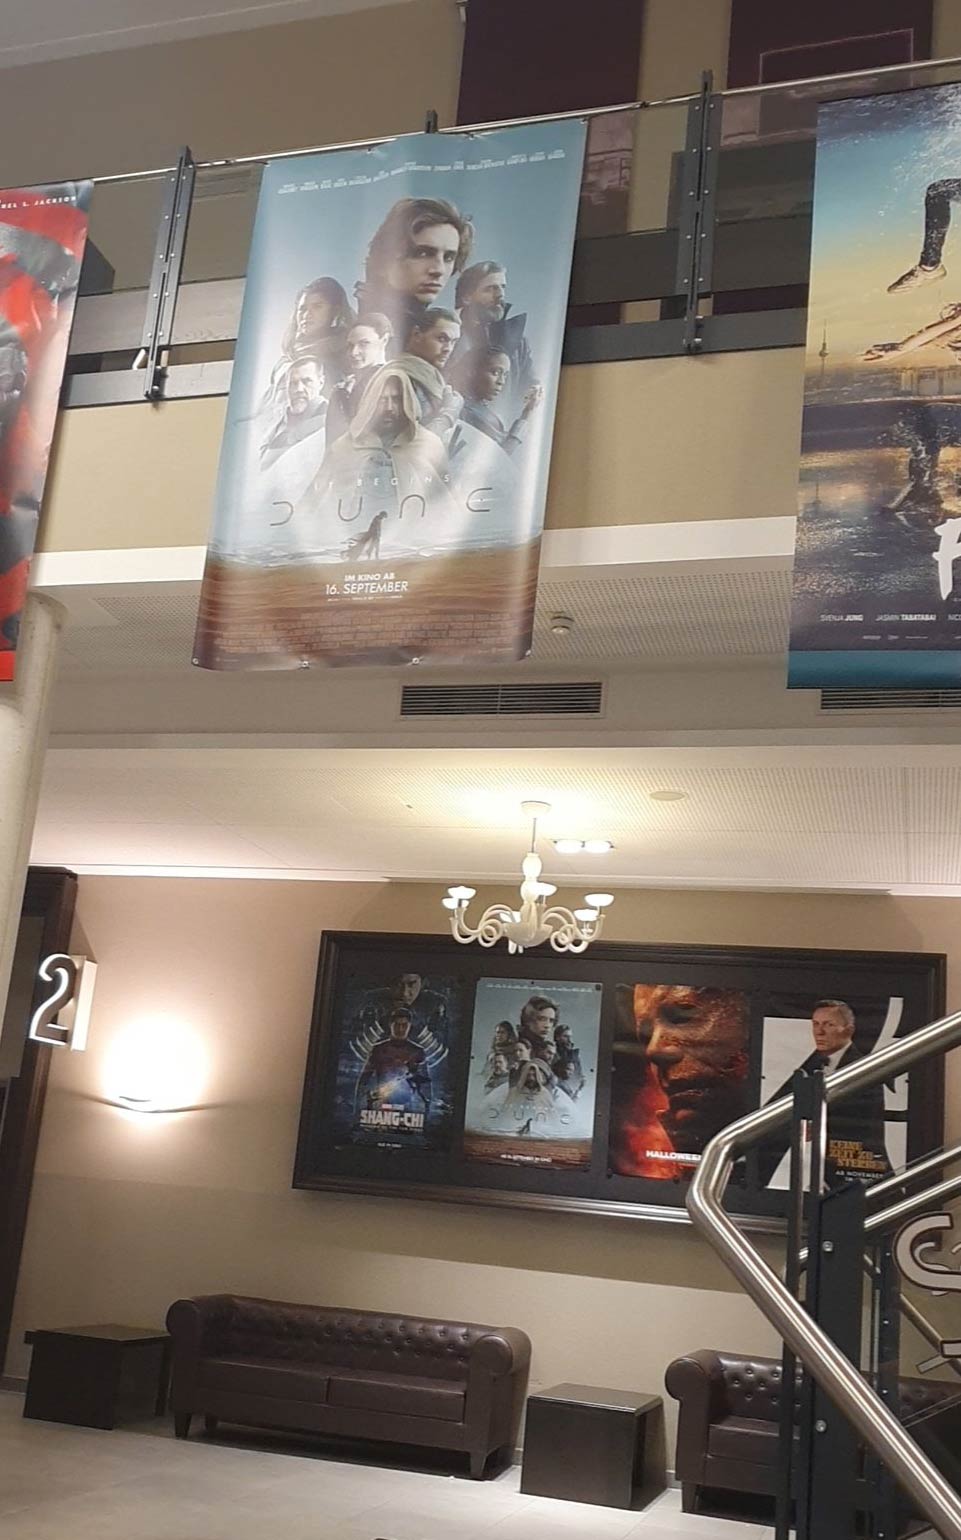 Banners and posters promoting the Dune movie, inside of a cinema in Germany.